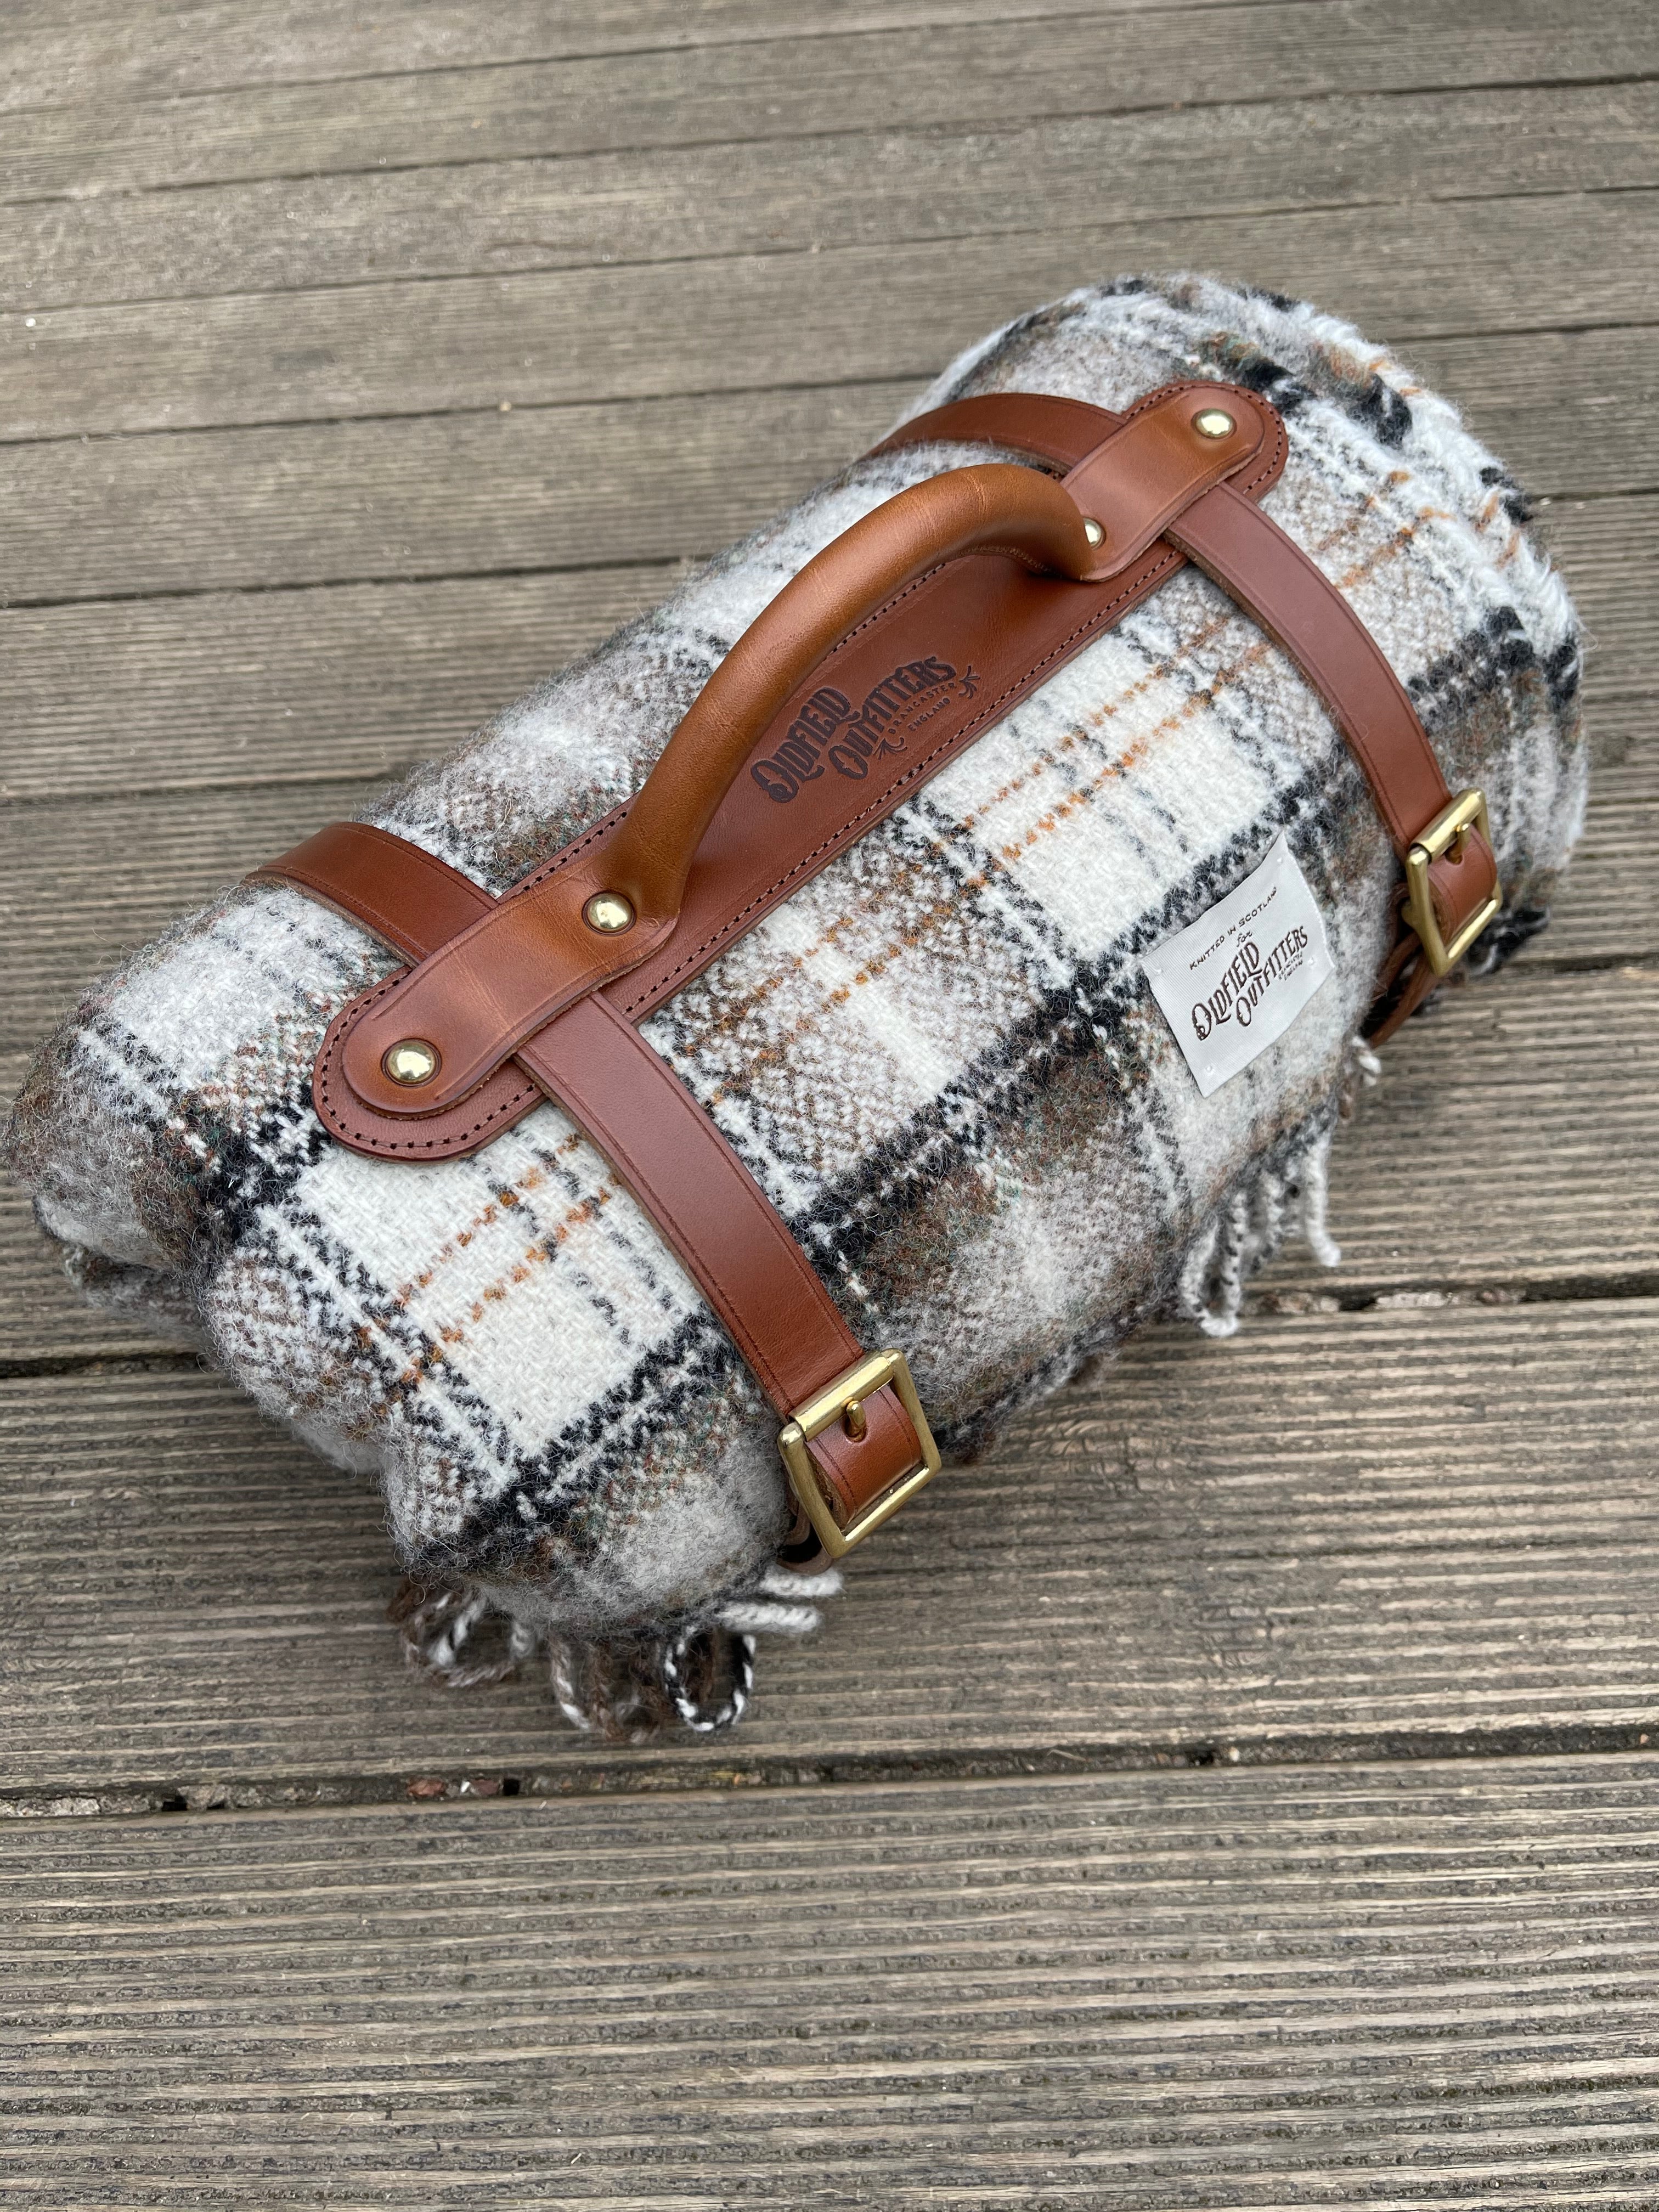 Picnic Blanket with leather blanket straps